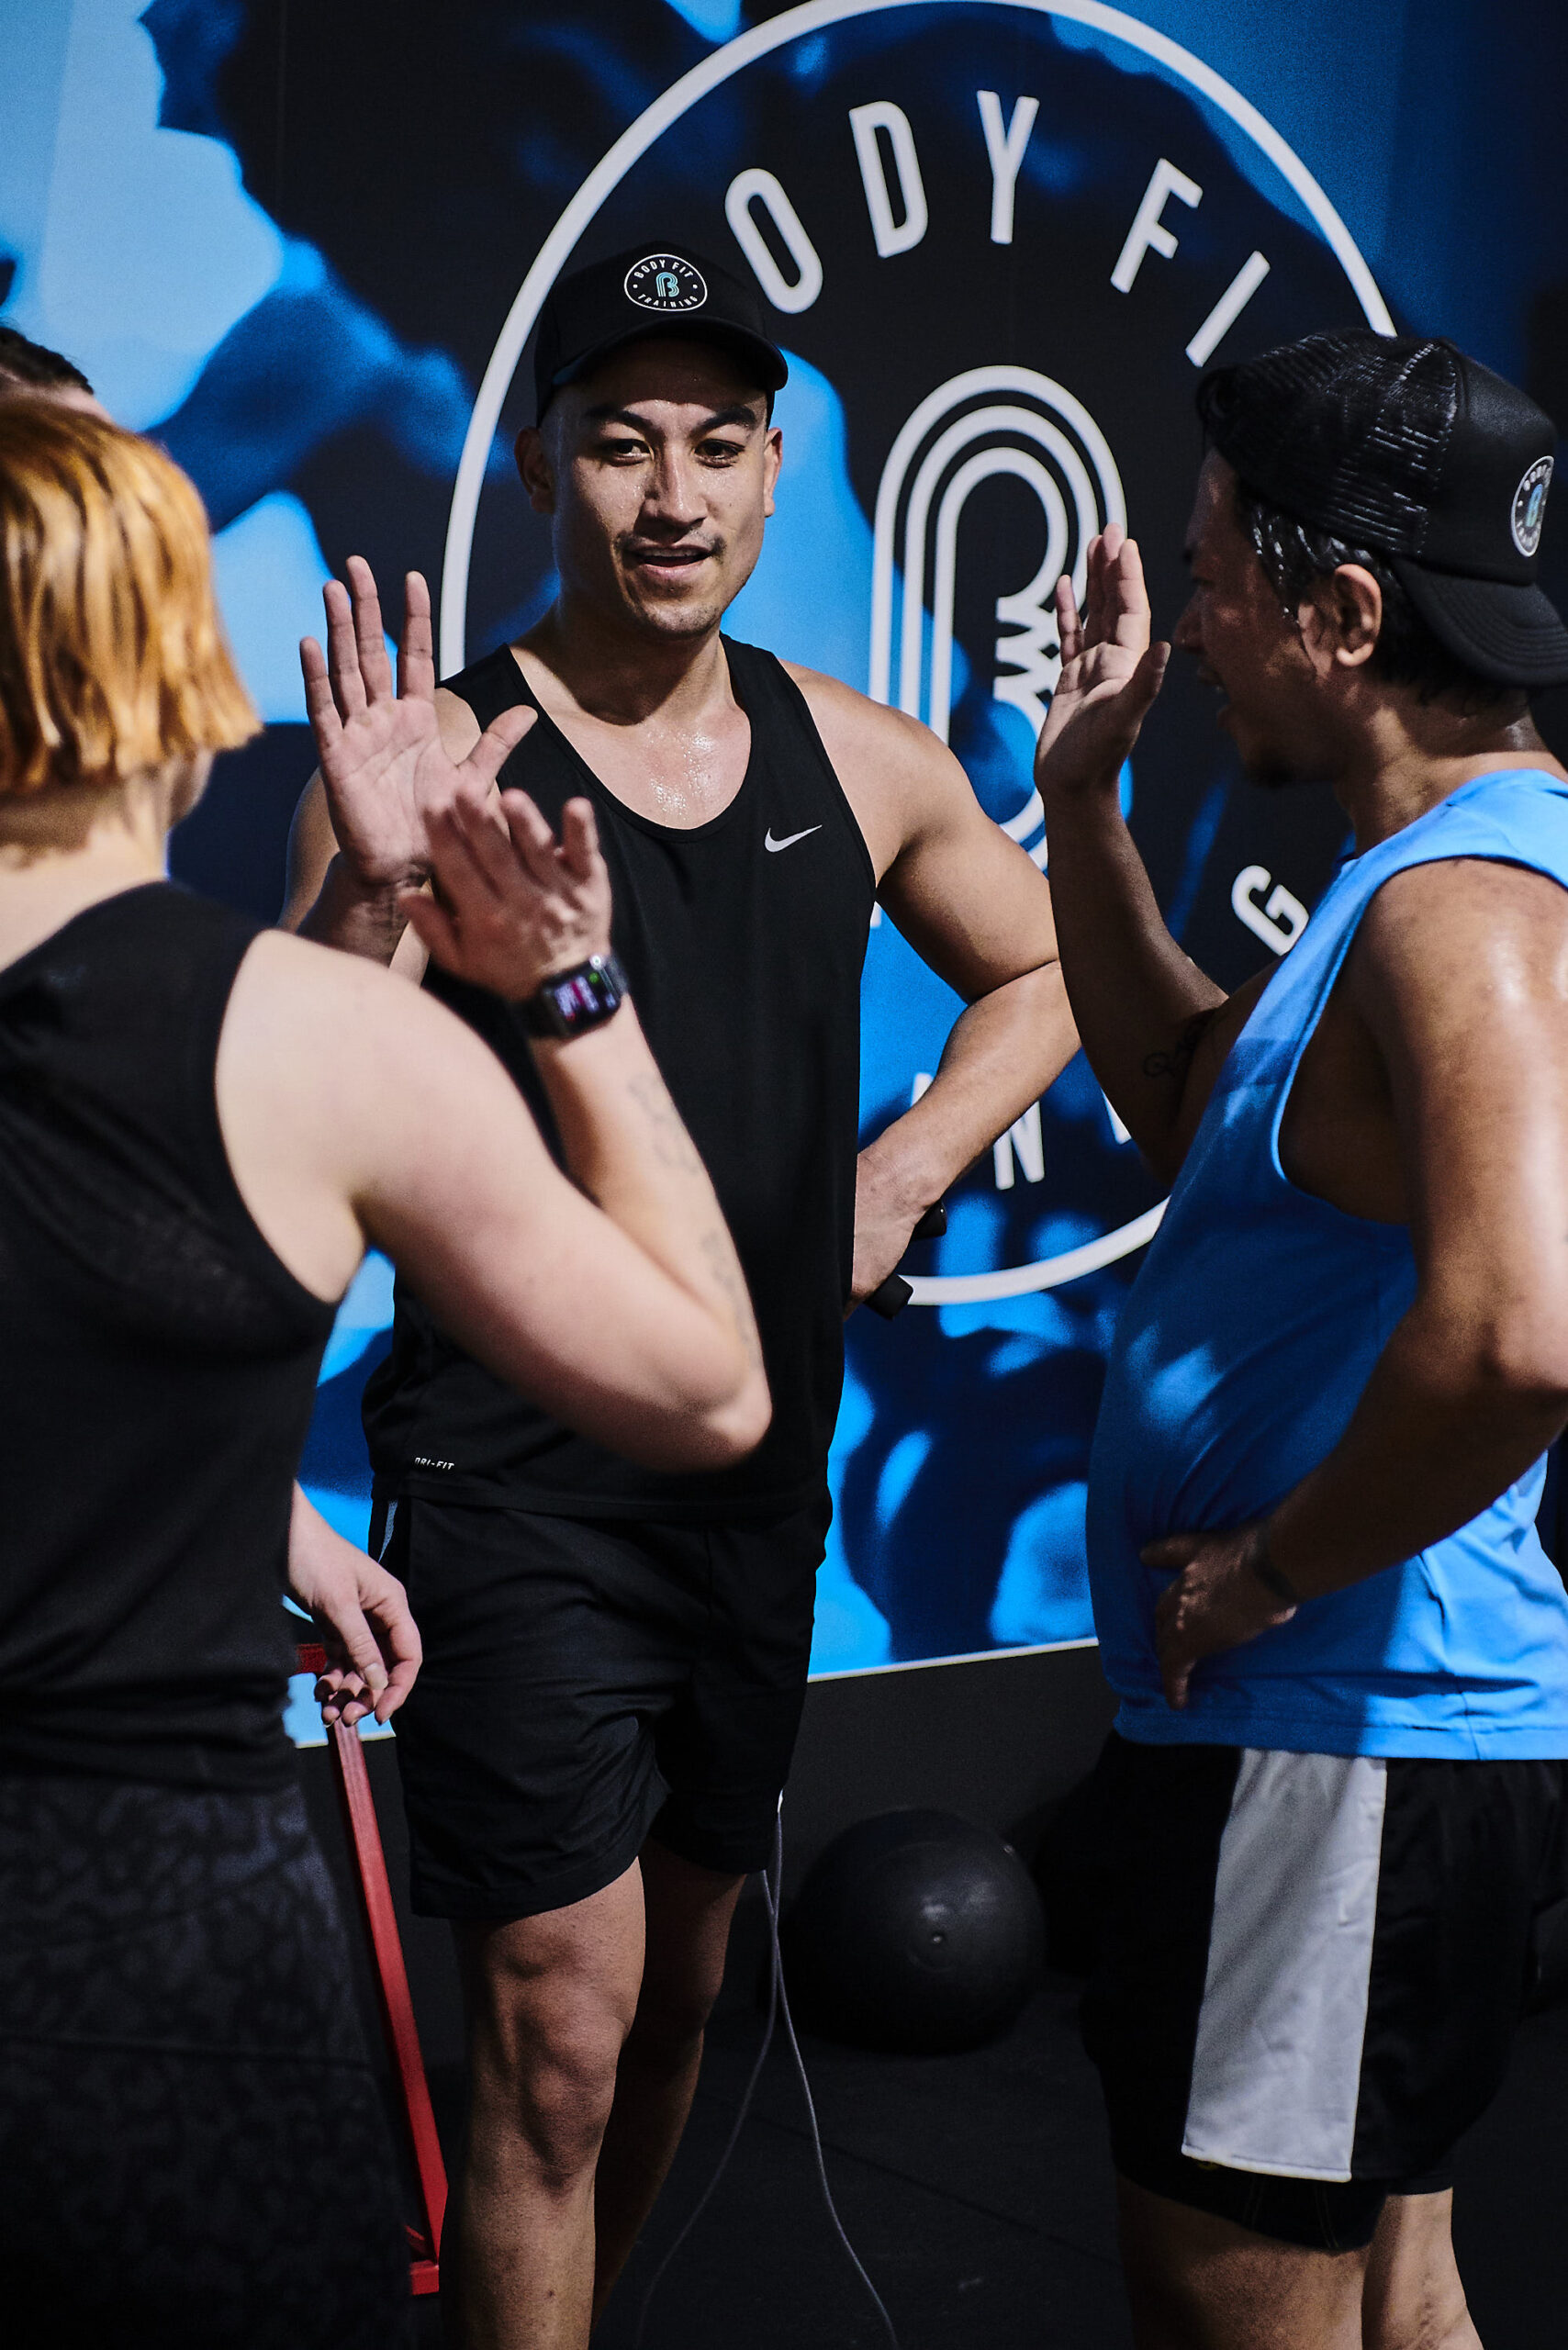 Body Fit Training launches new global community-focused fitness programme